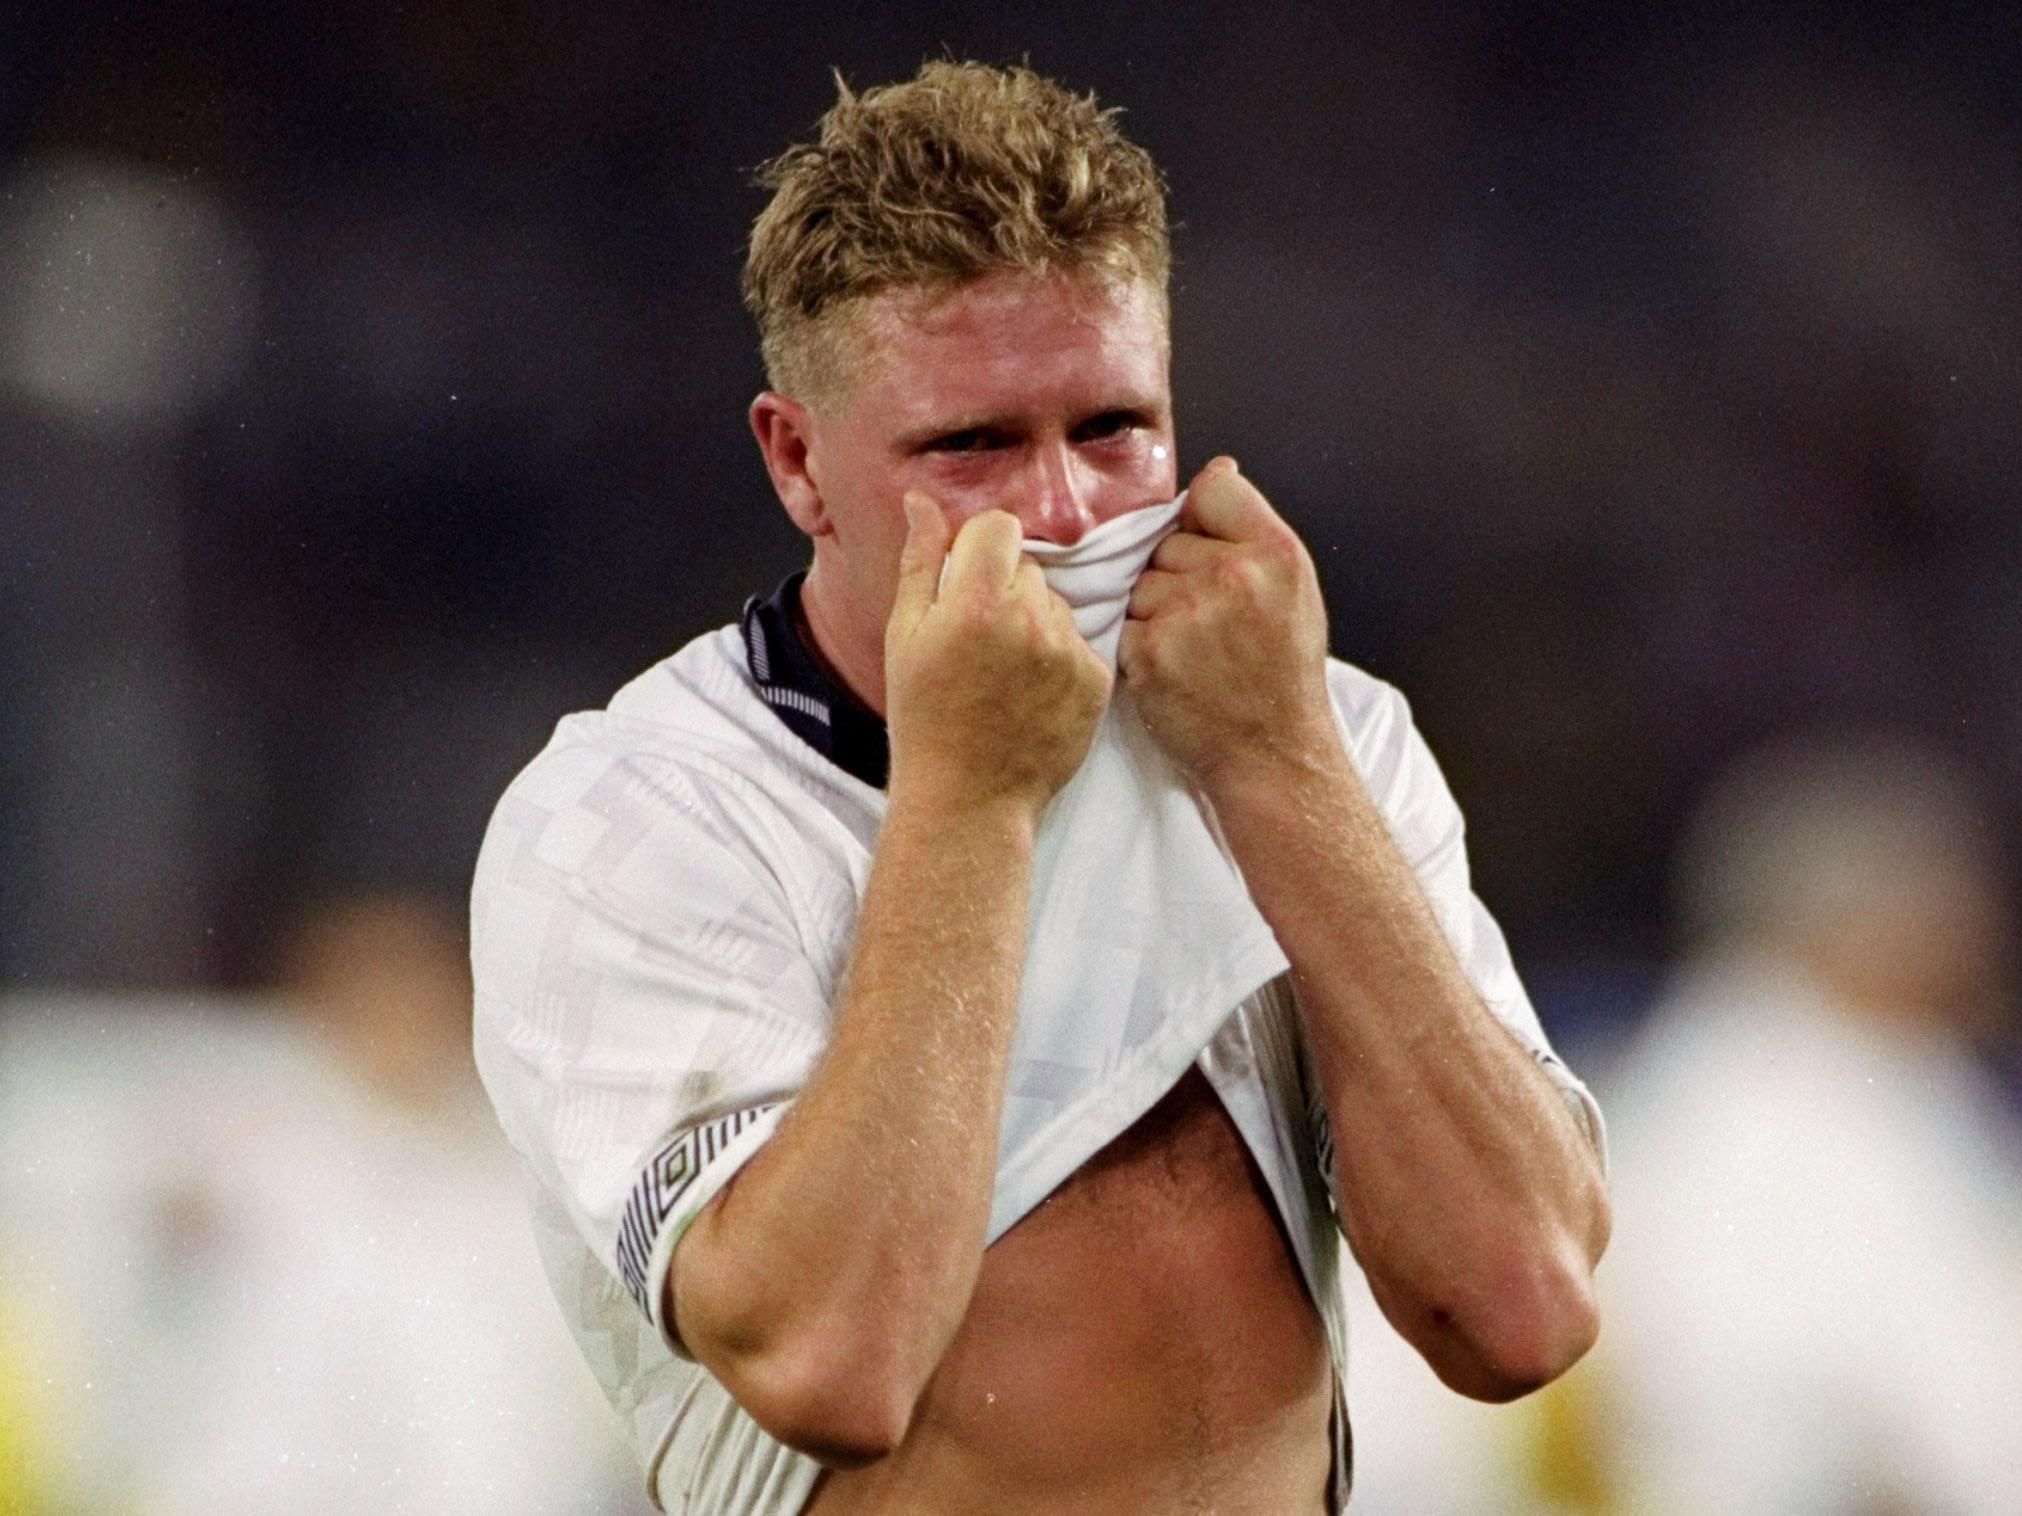 Paul Gascoigne burst into tears after defeat to West Germany in 1990